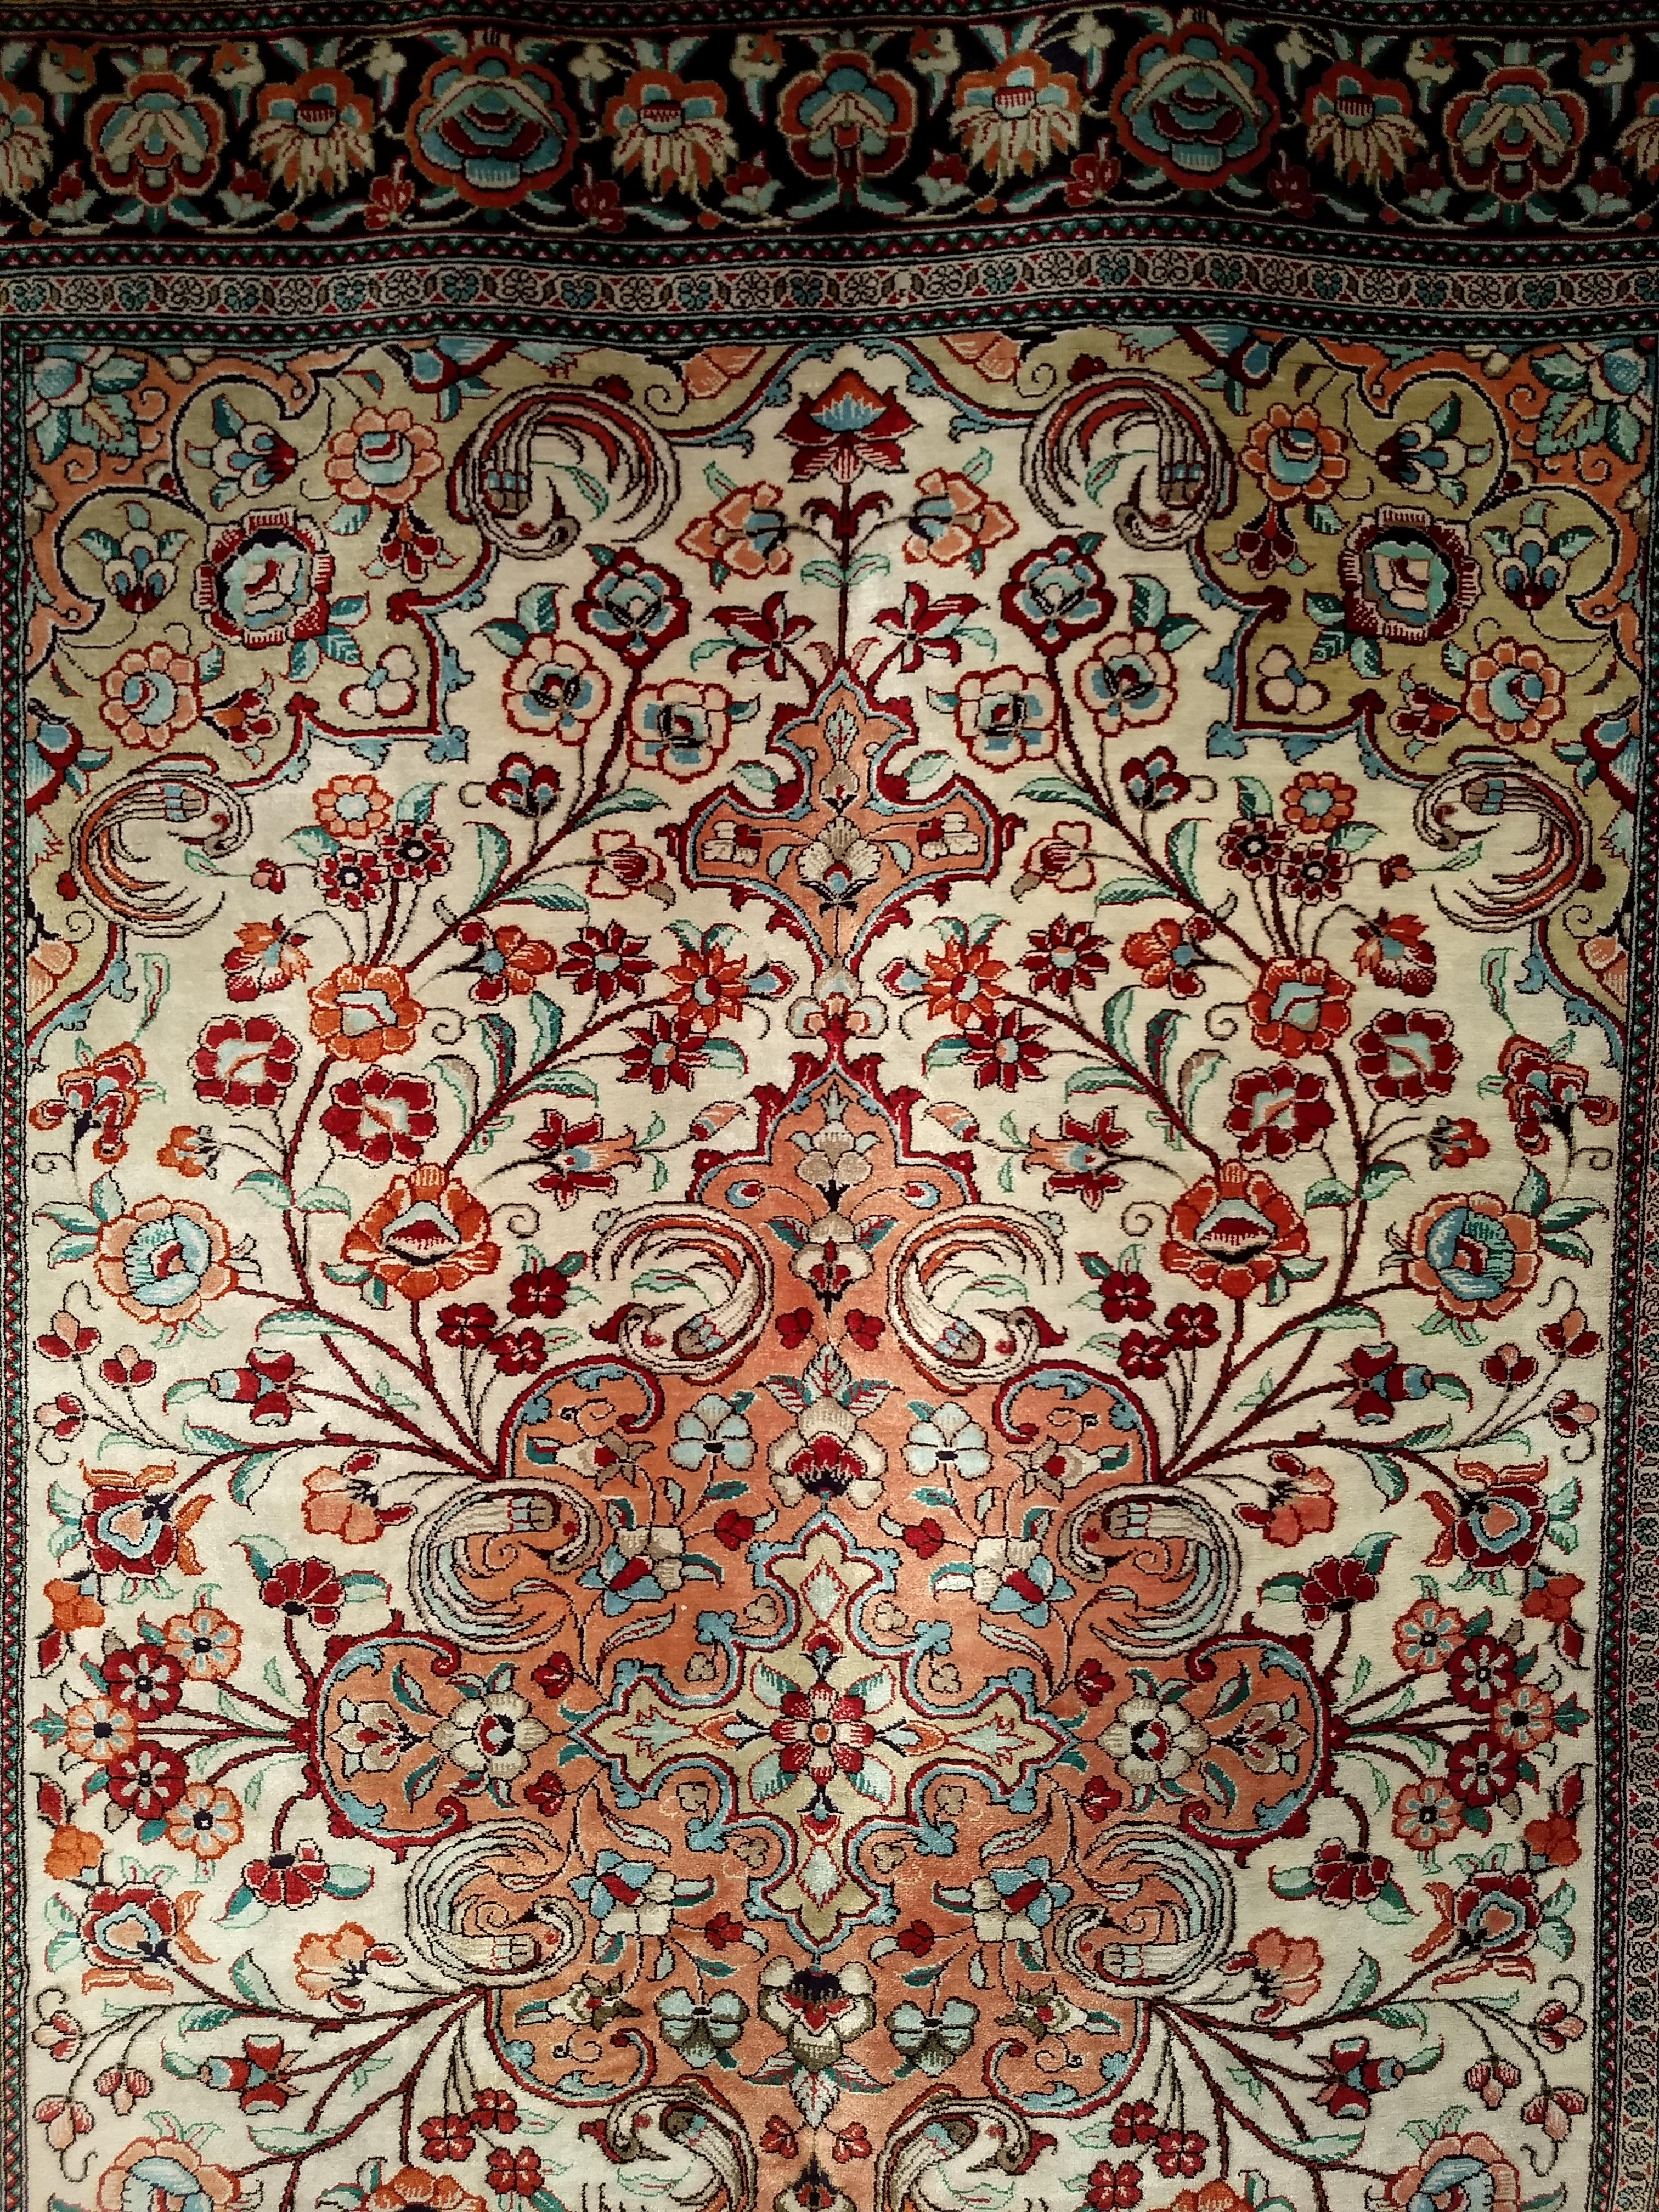 Vintage Persian Silk Qum Area Rug in Floral Pattern in Ivory, Rust, Camel, Navy In Good Condition For Sale In Barrington, IL